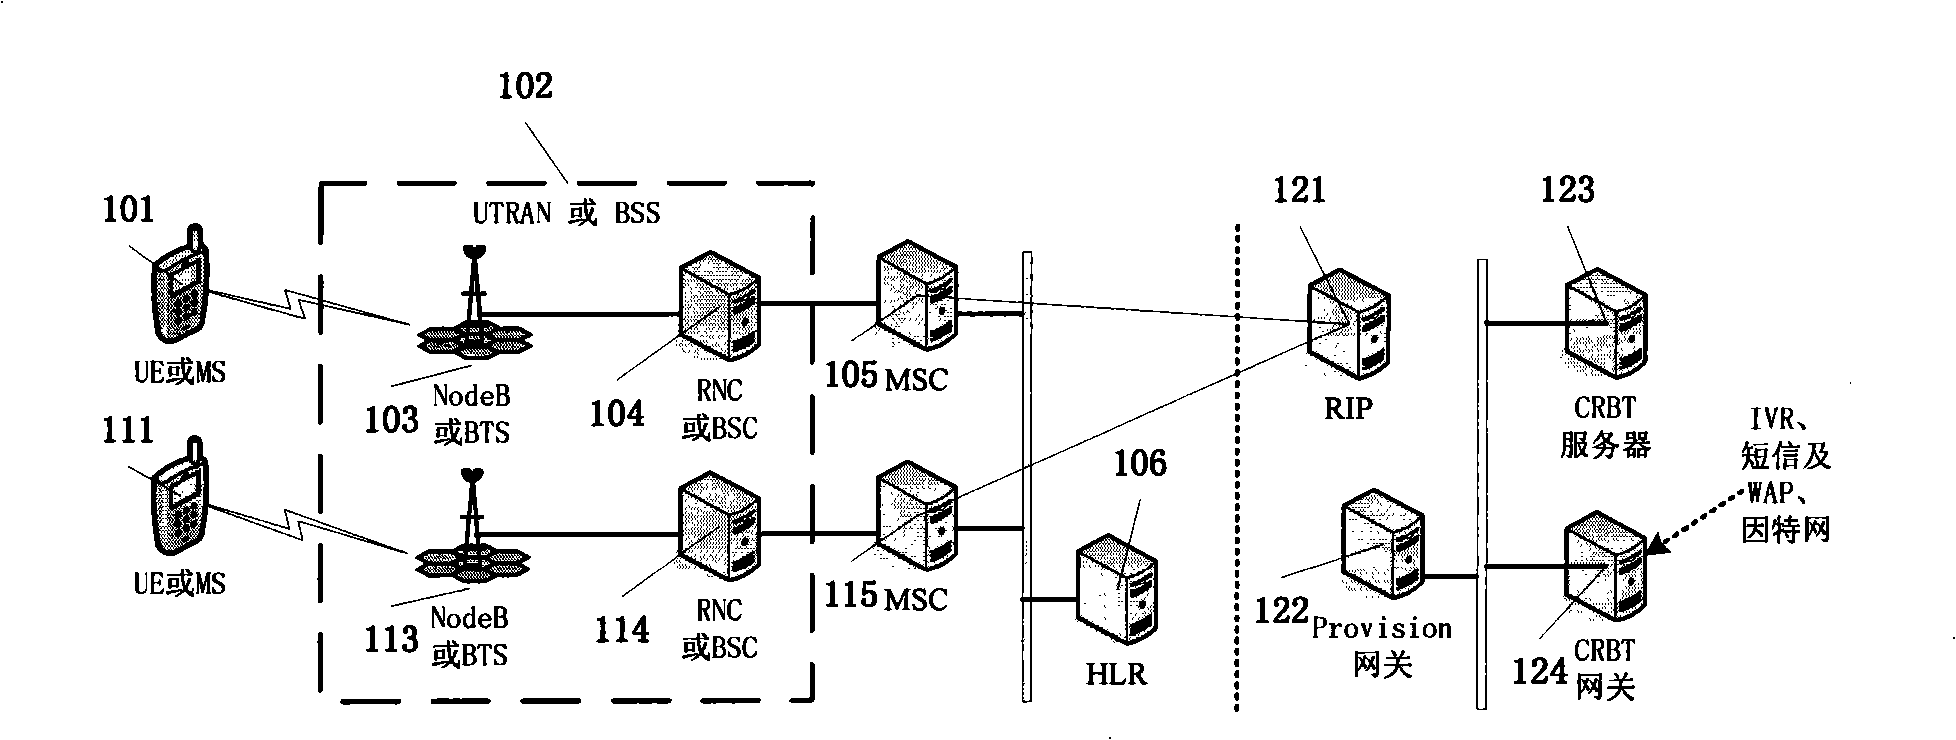 A realization method for personalized multimedia ring service in mobile communication system